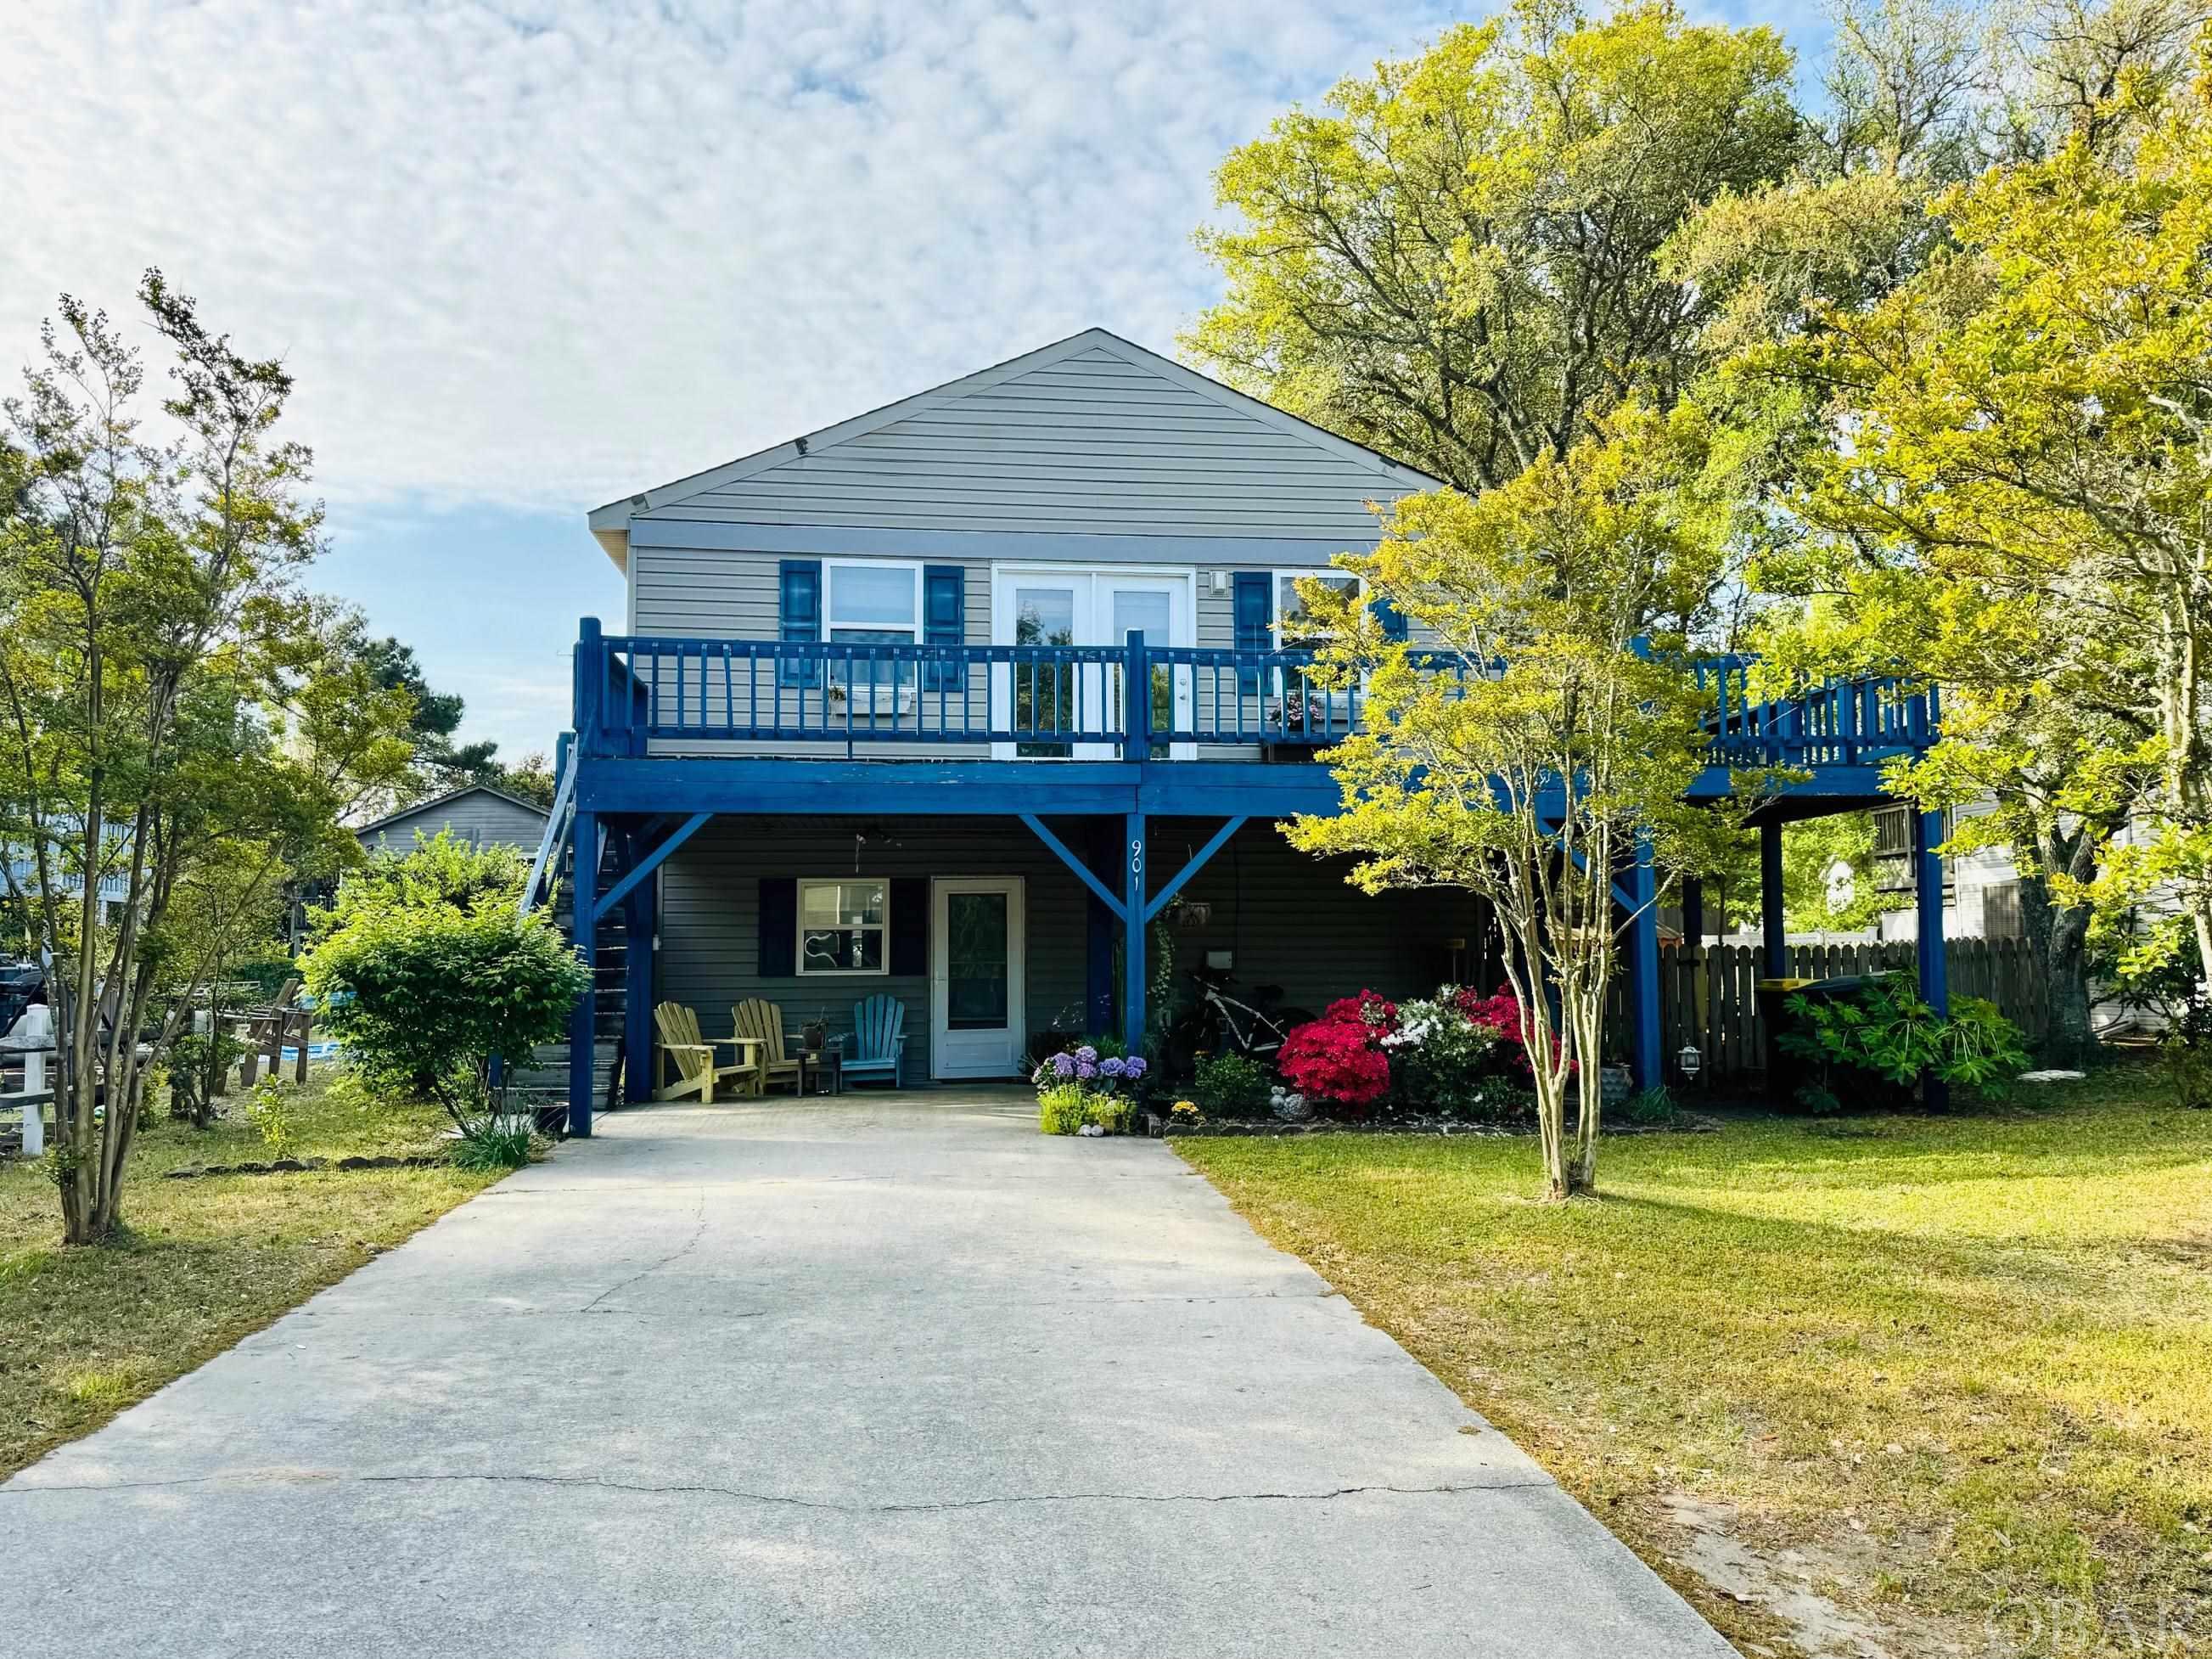 901 Fourth Street, Kill Devil Hills, NC 27948, 2 Bedrooms Bedrooms, ,2 BathroomsBathrooms,Residential,For sale,Fourth Street,125462